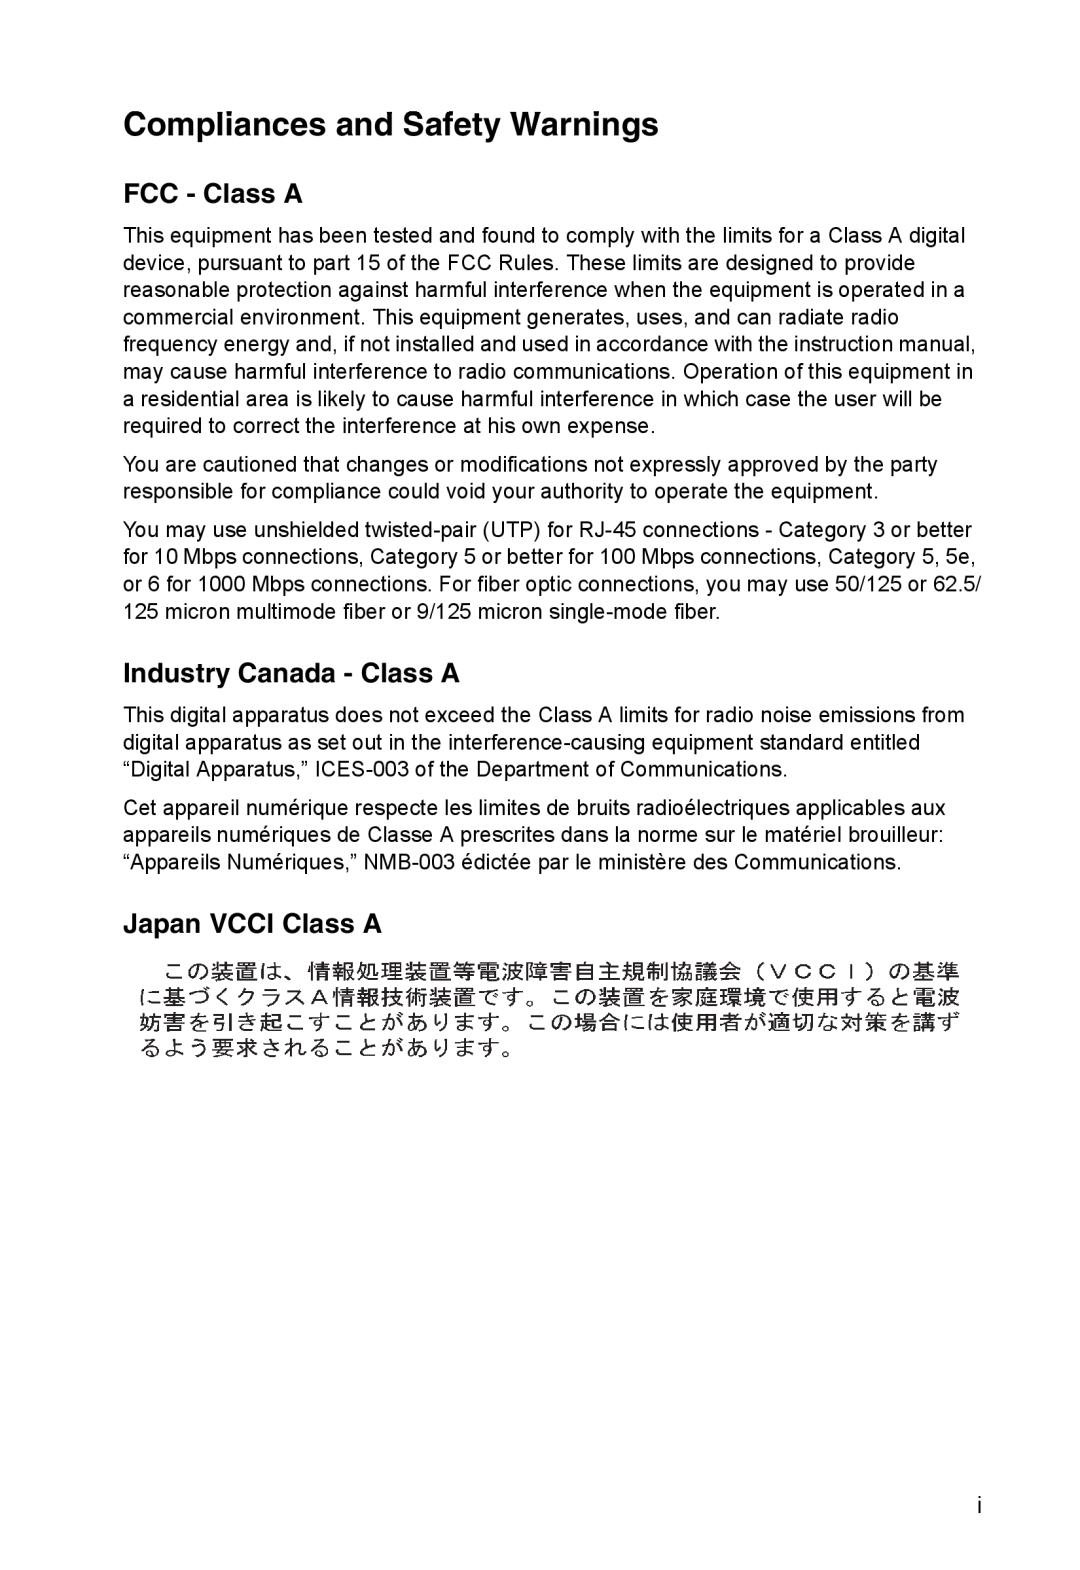 Accton Technology ES4324 FCC - Class A, Industry Canada - Class A, Japan VCCI Class A, Compliances and Safety Warnings 